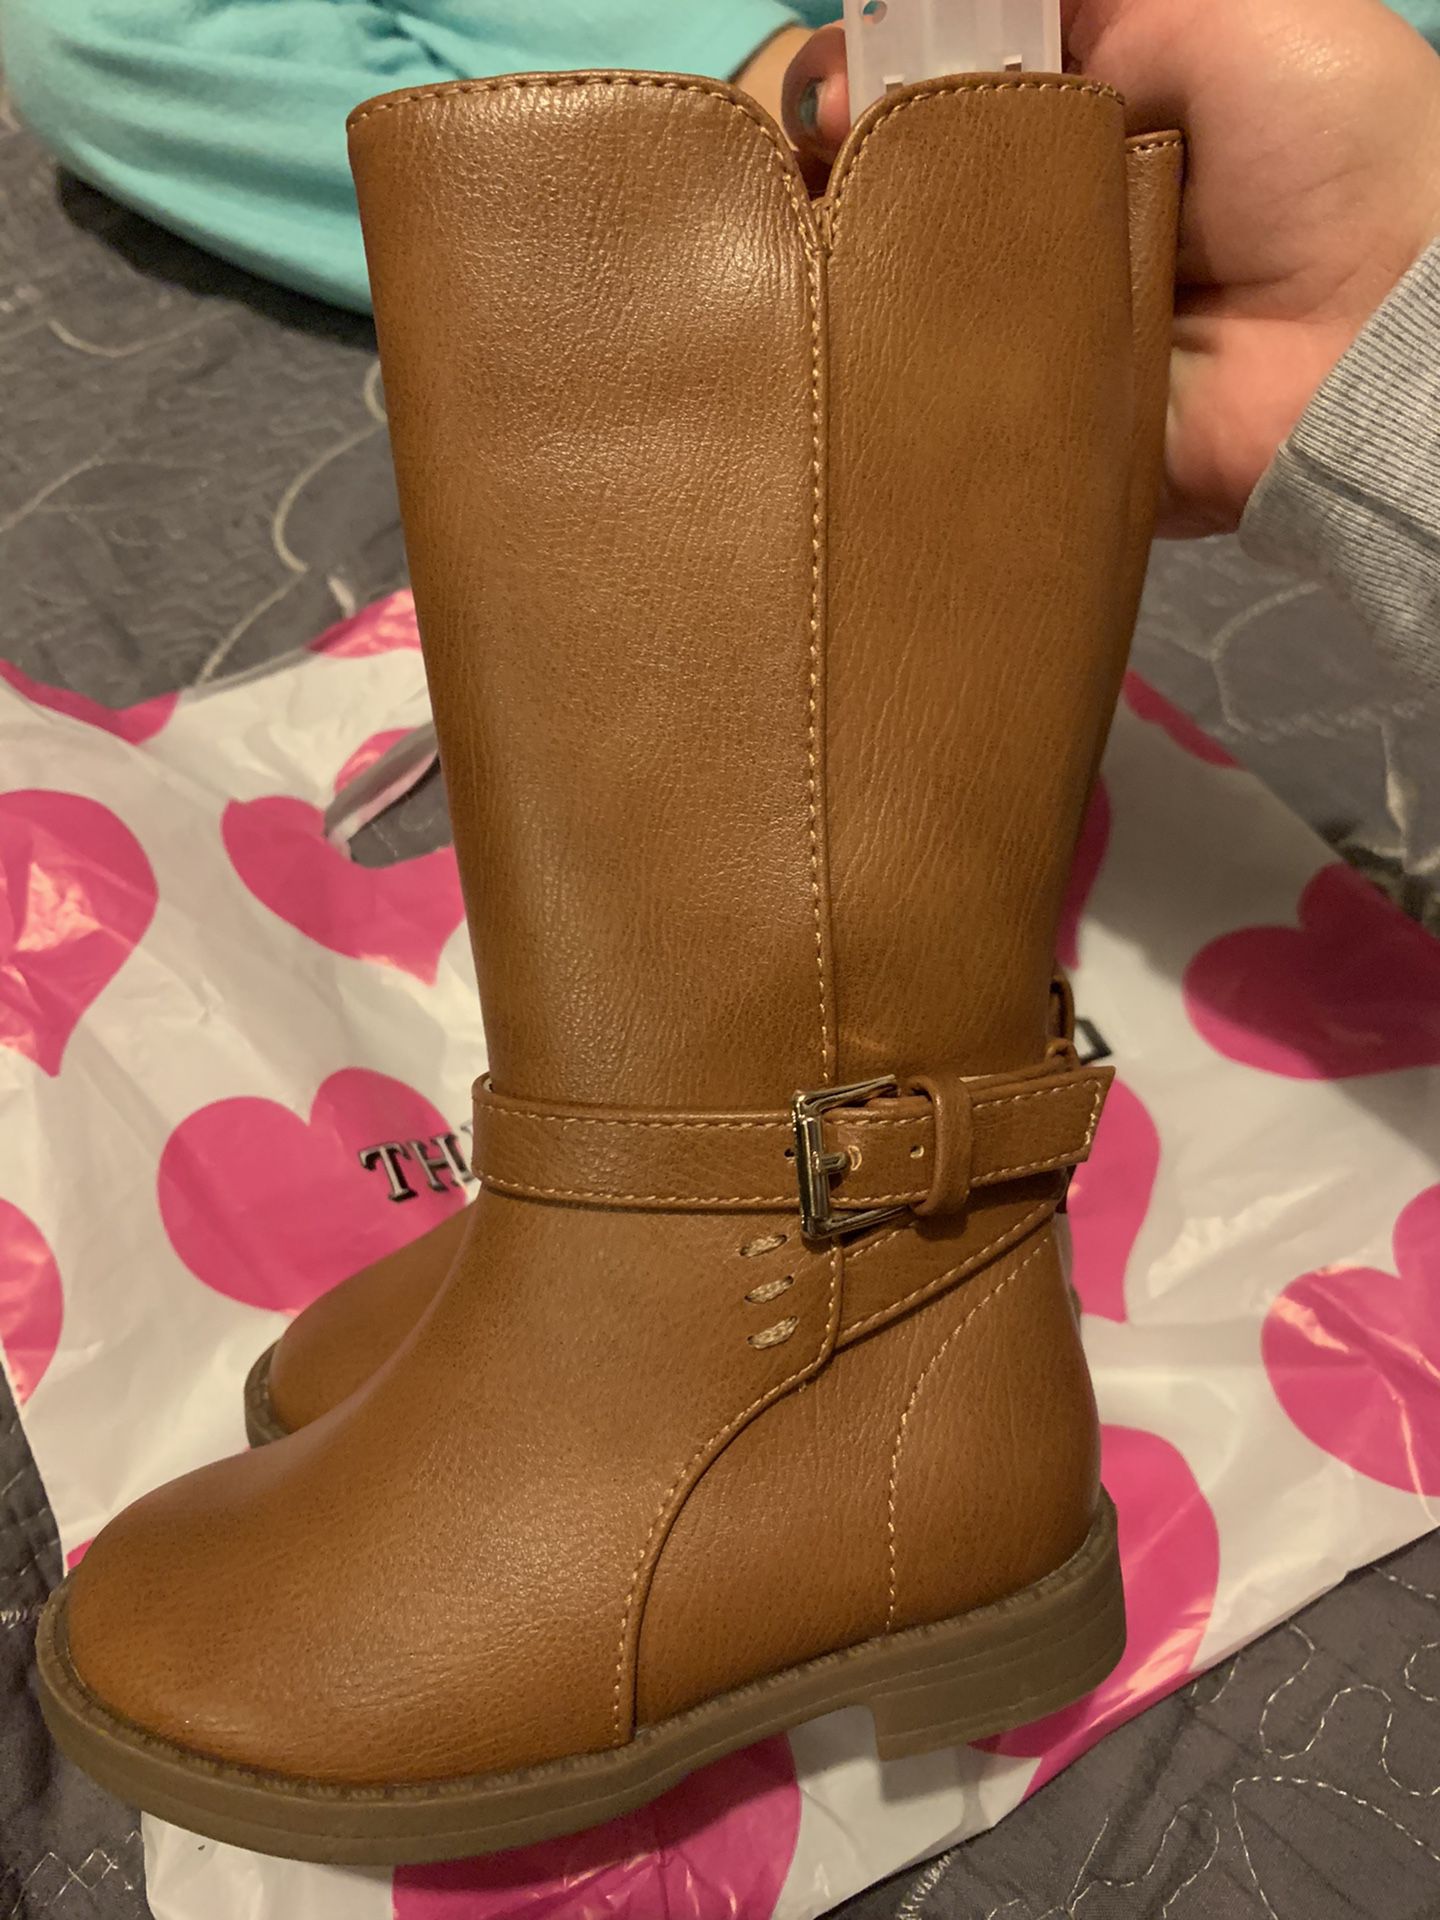 Size 5t girl boots